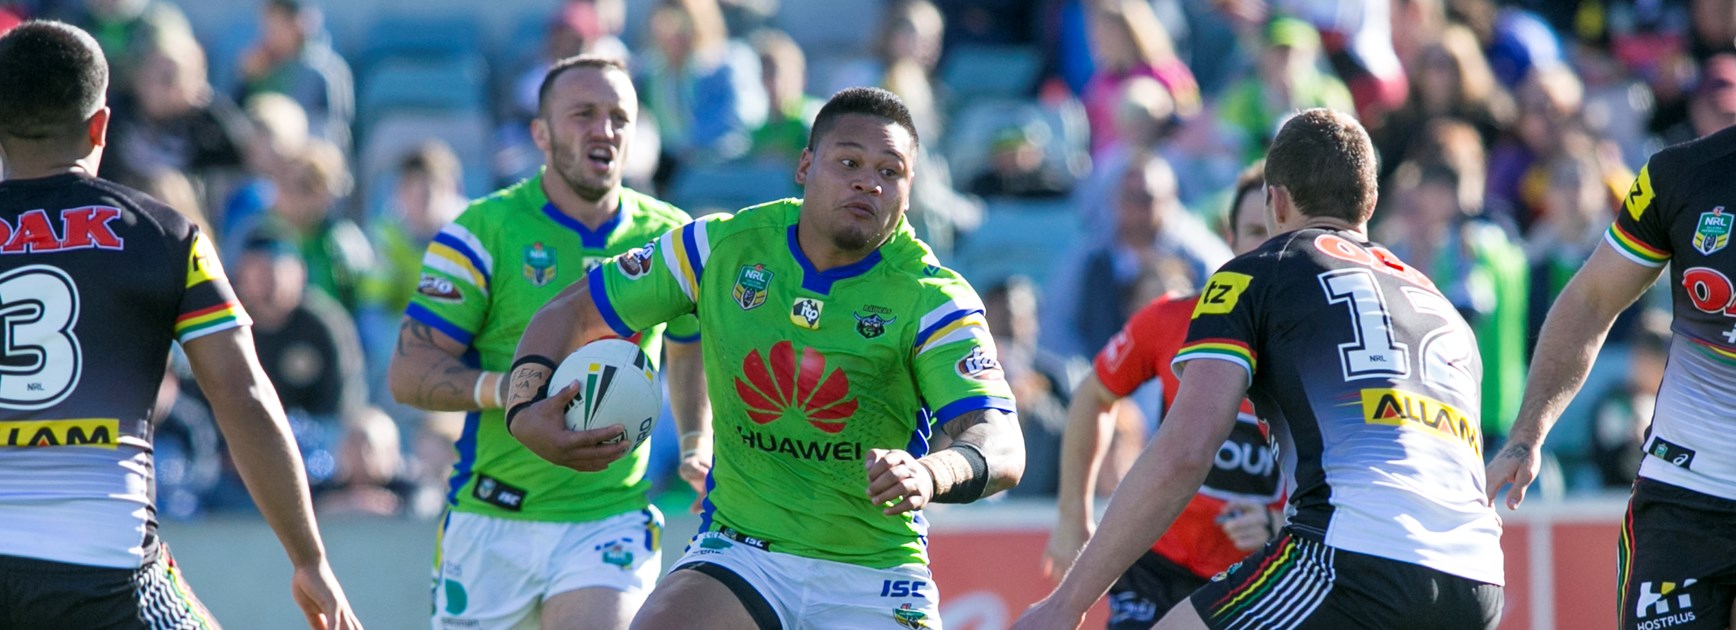 Canberra Raiders centre Joey Leilua takes on the Panthers defence.